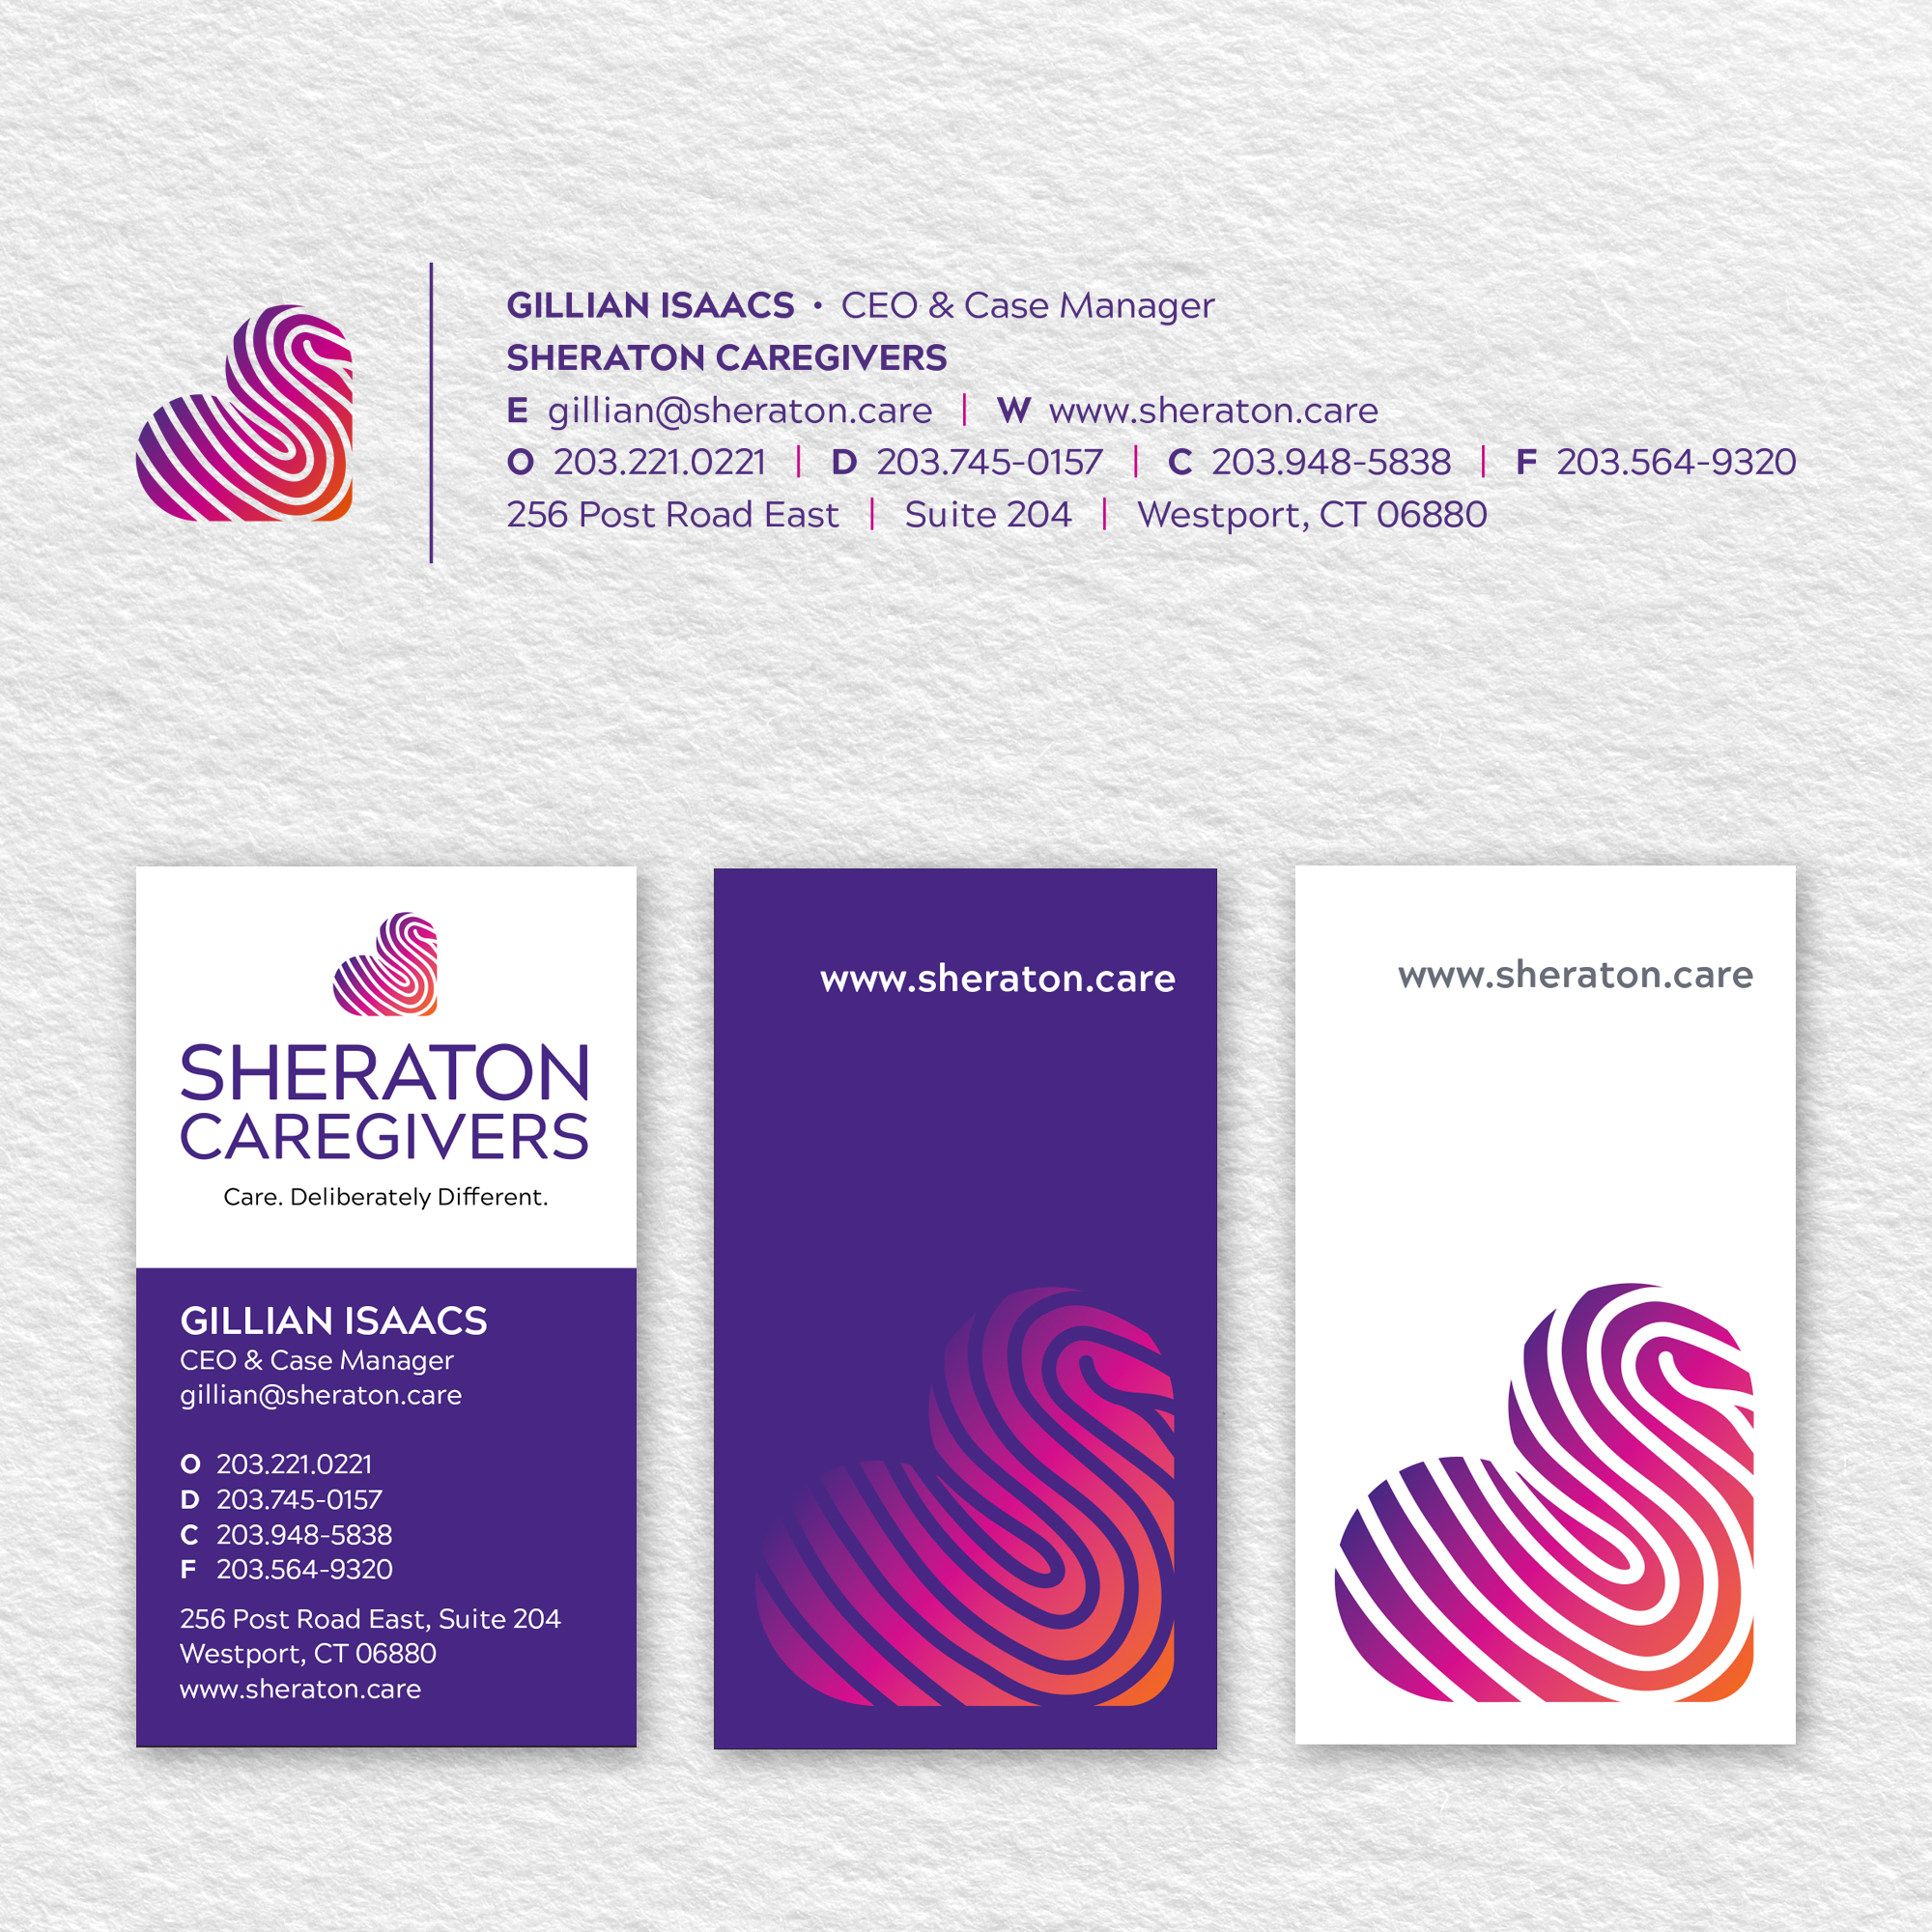 Front and back of printed business cards and e-signature